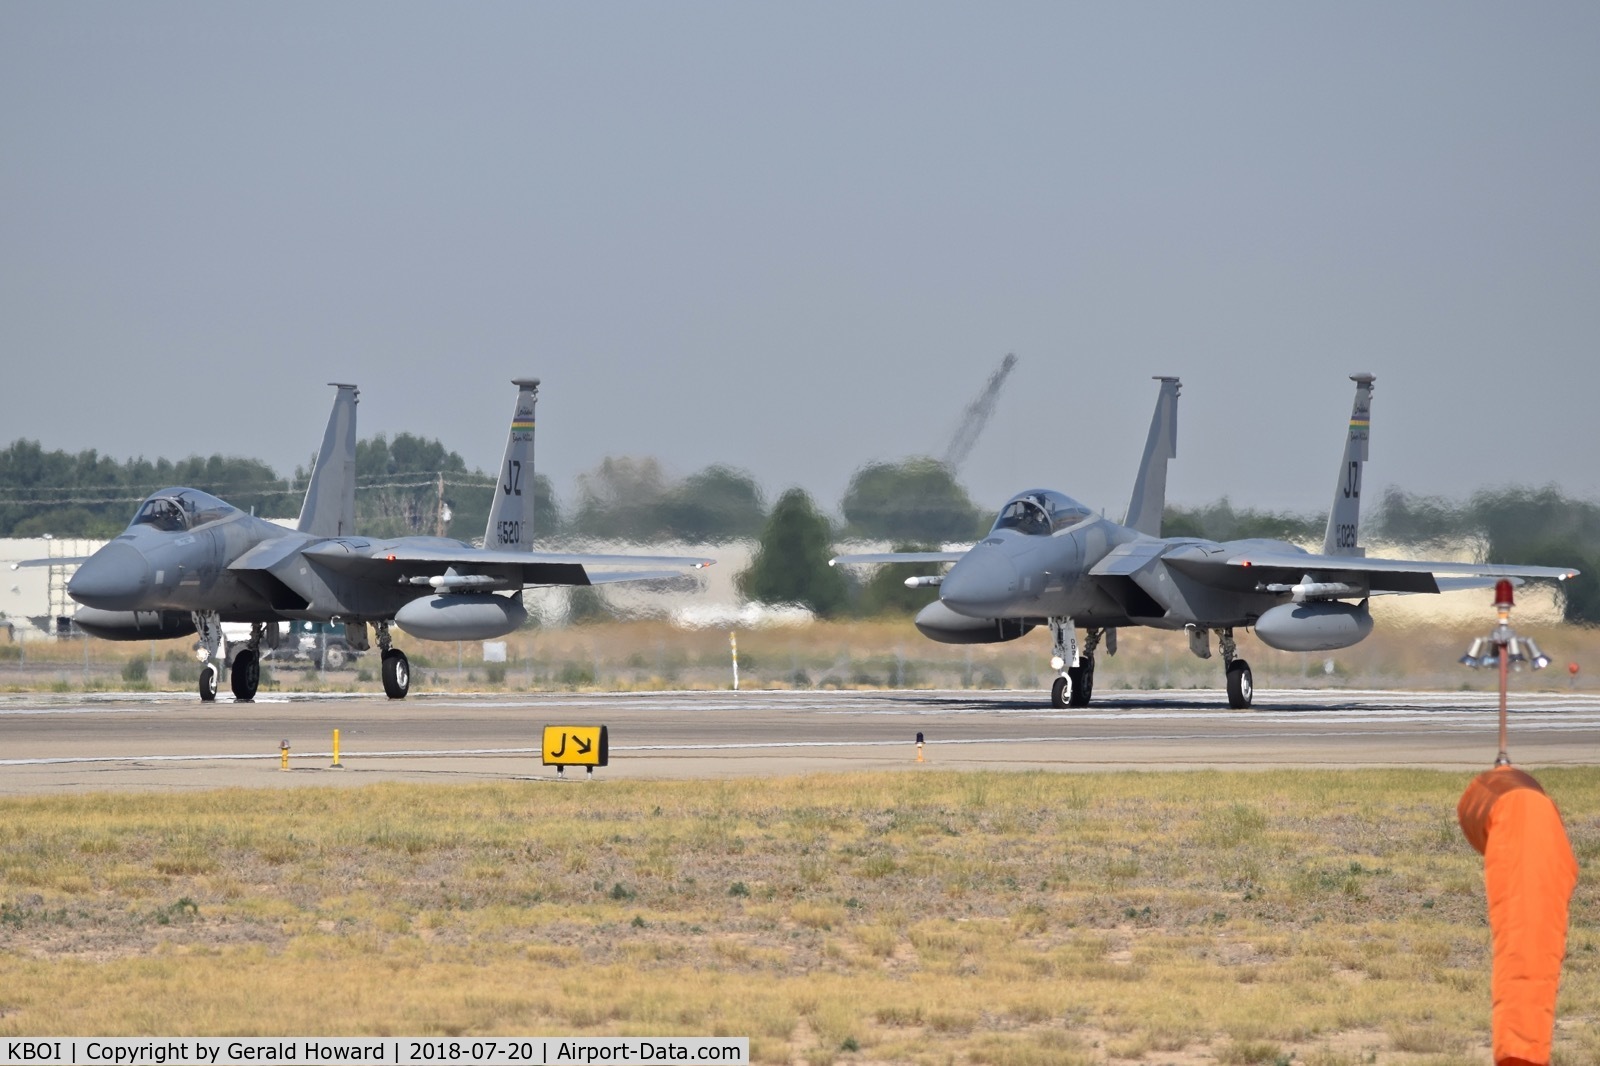 Boise Air Terminal/gowen Fld Airport (BOI) - F-15C fighters from the 122nd Fighter Sq. 